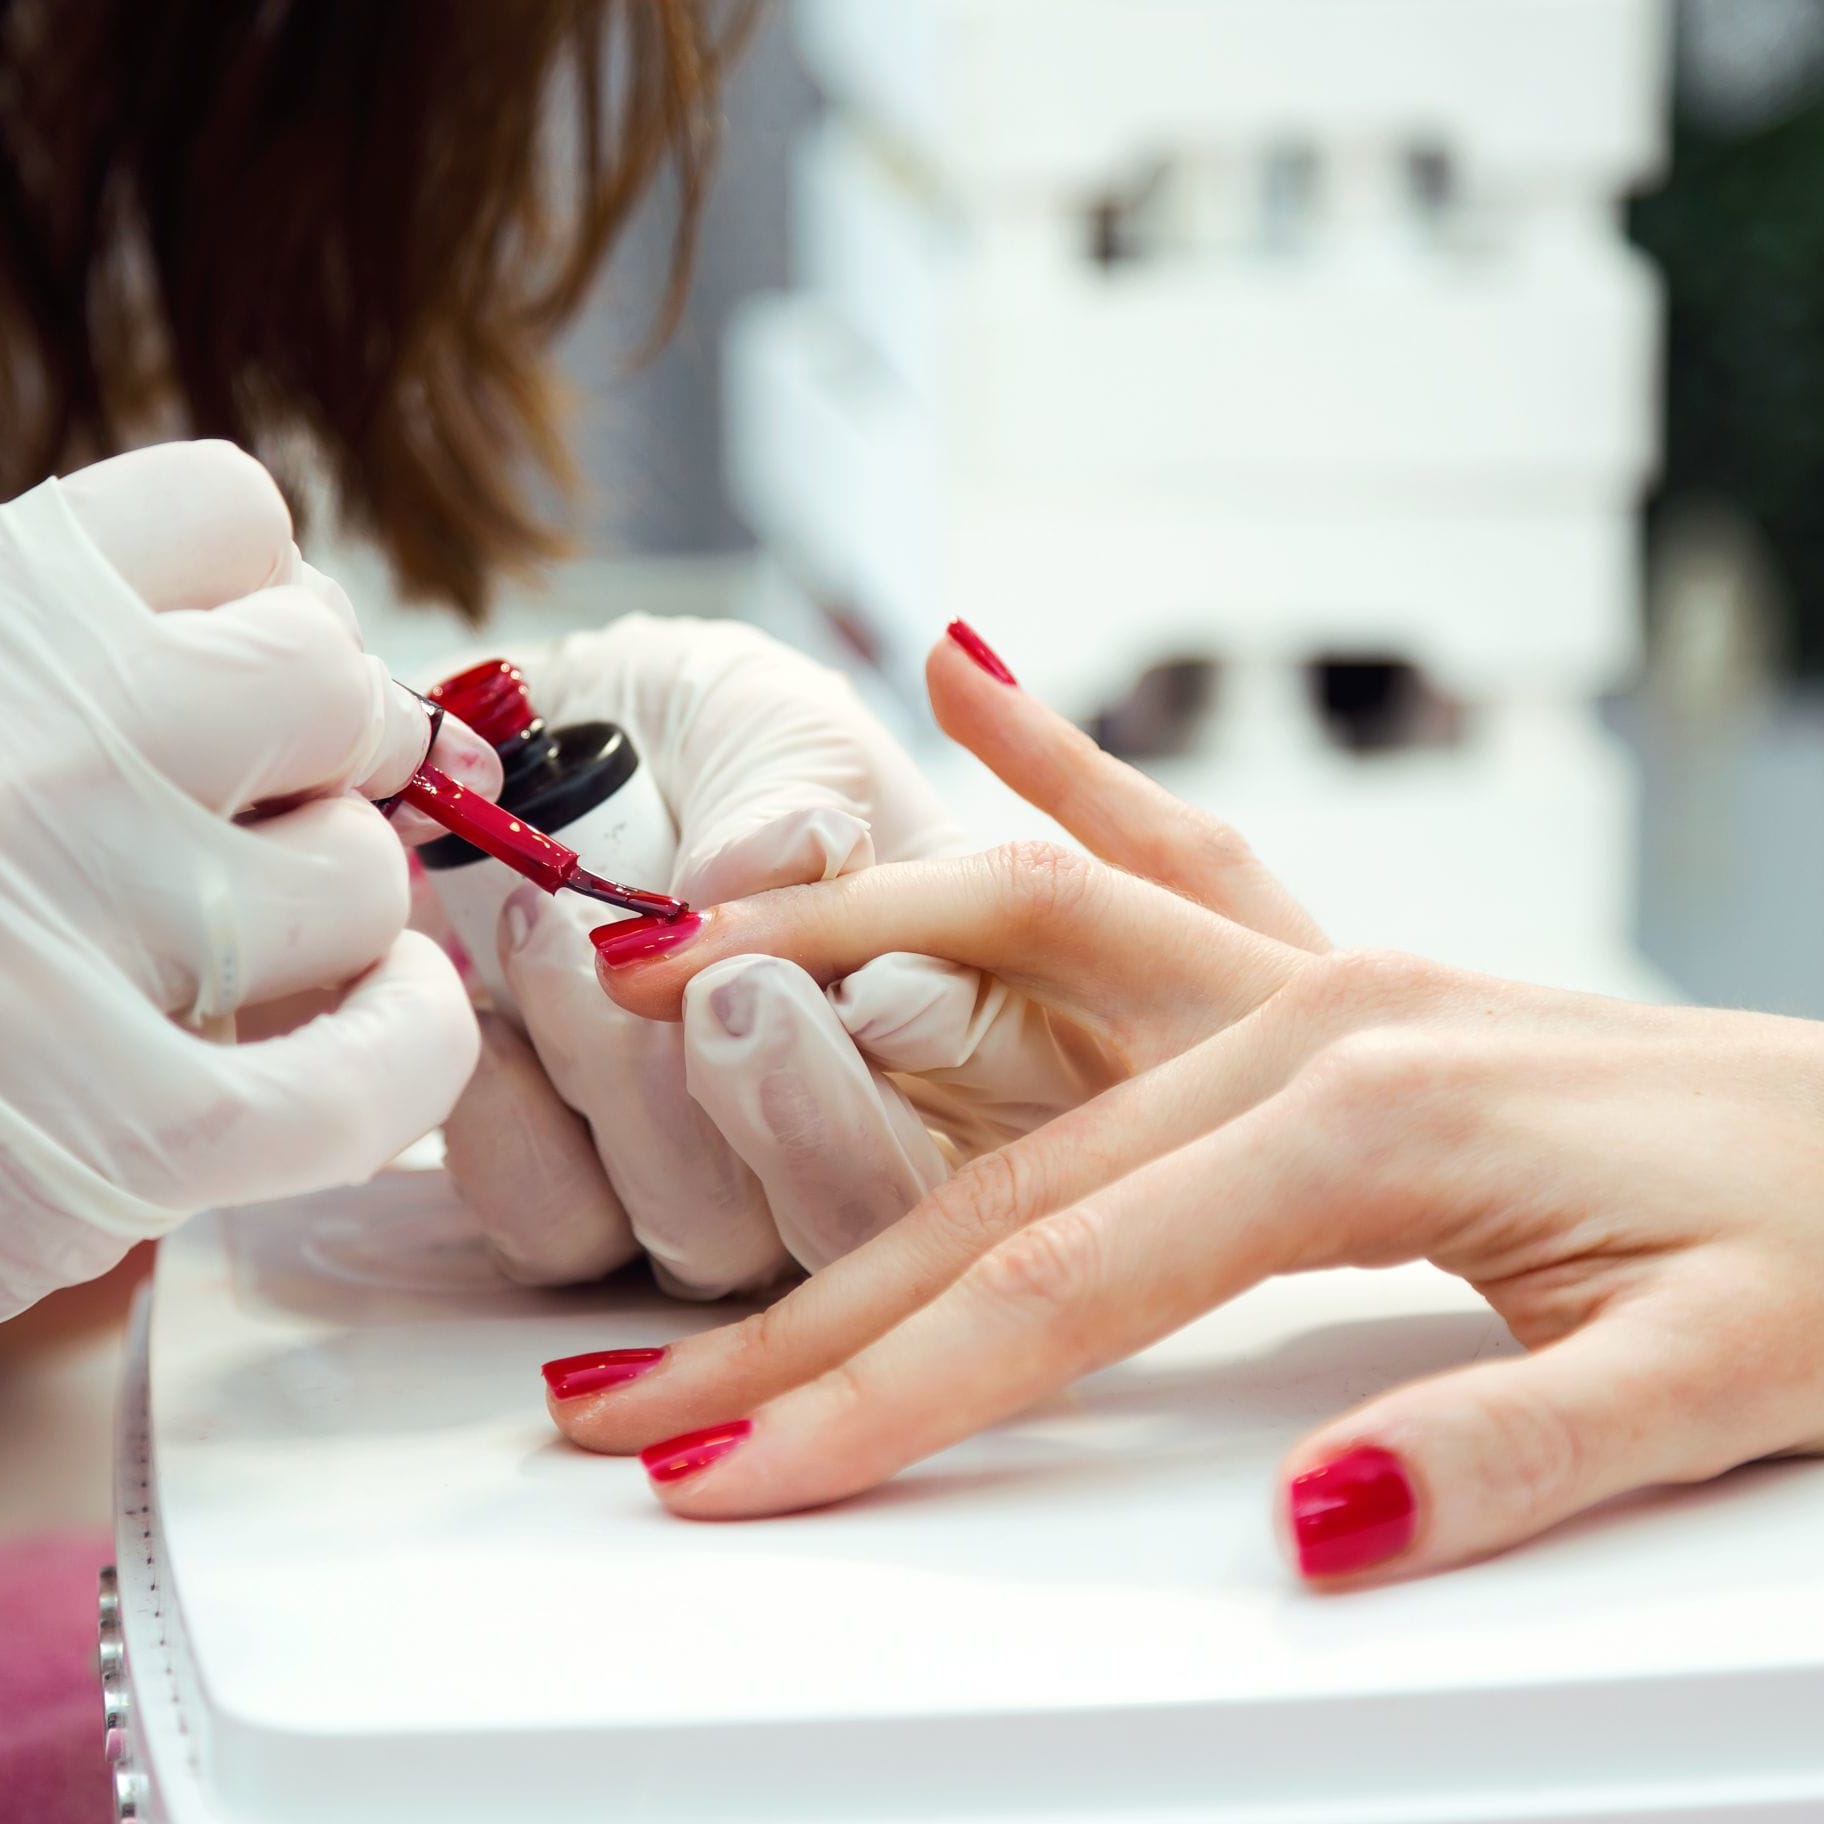 Classic Manicure + Pedicure with Foot Soak (1 Session) at Belle Lady - Get Deals, Cashback and Rewards with ShopBack GO